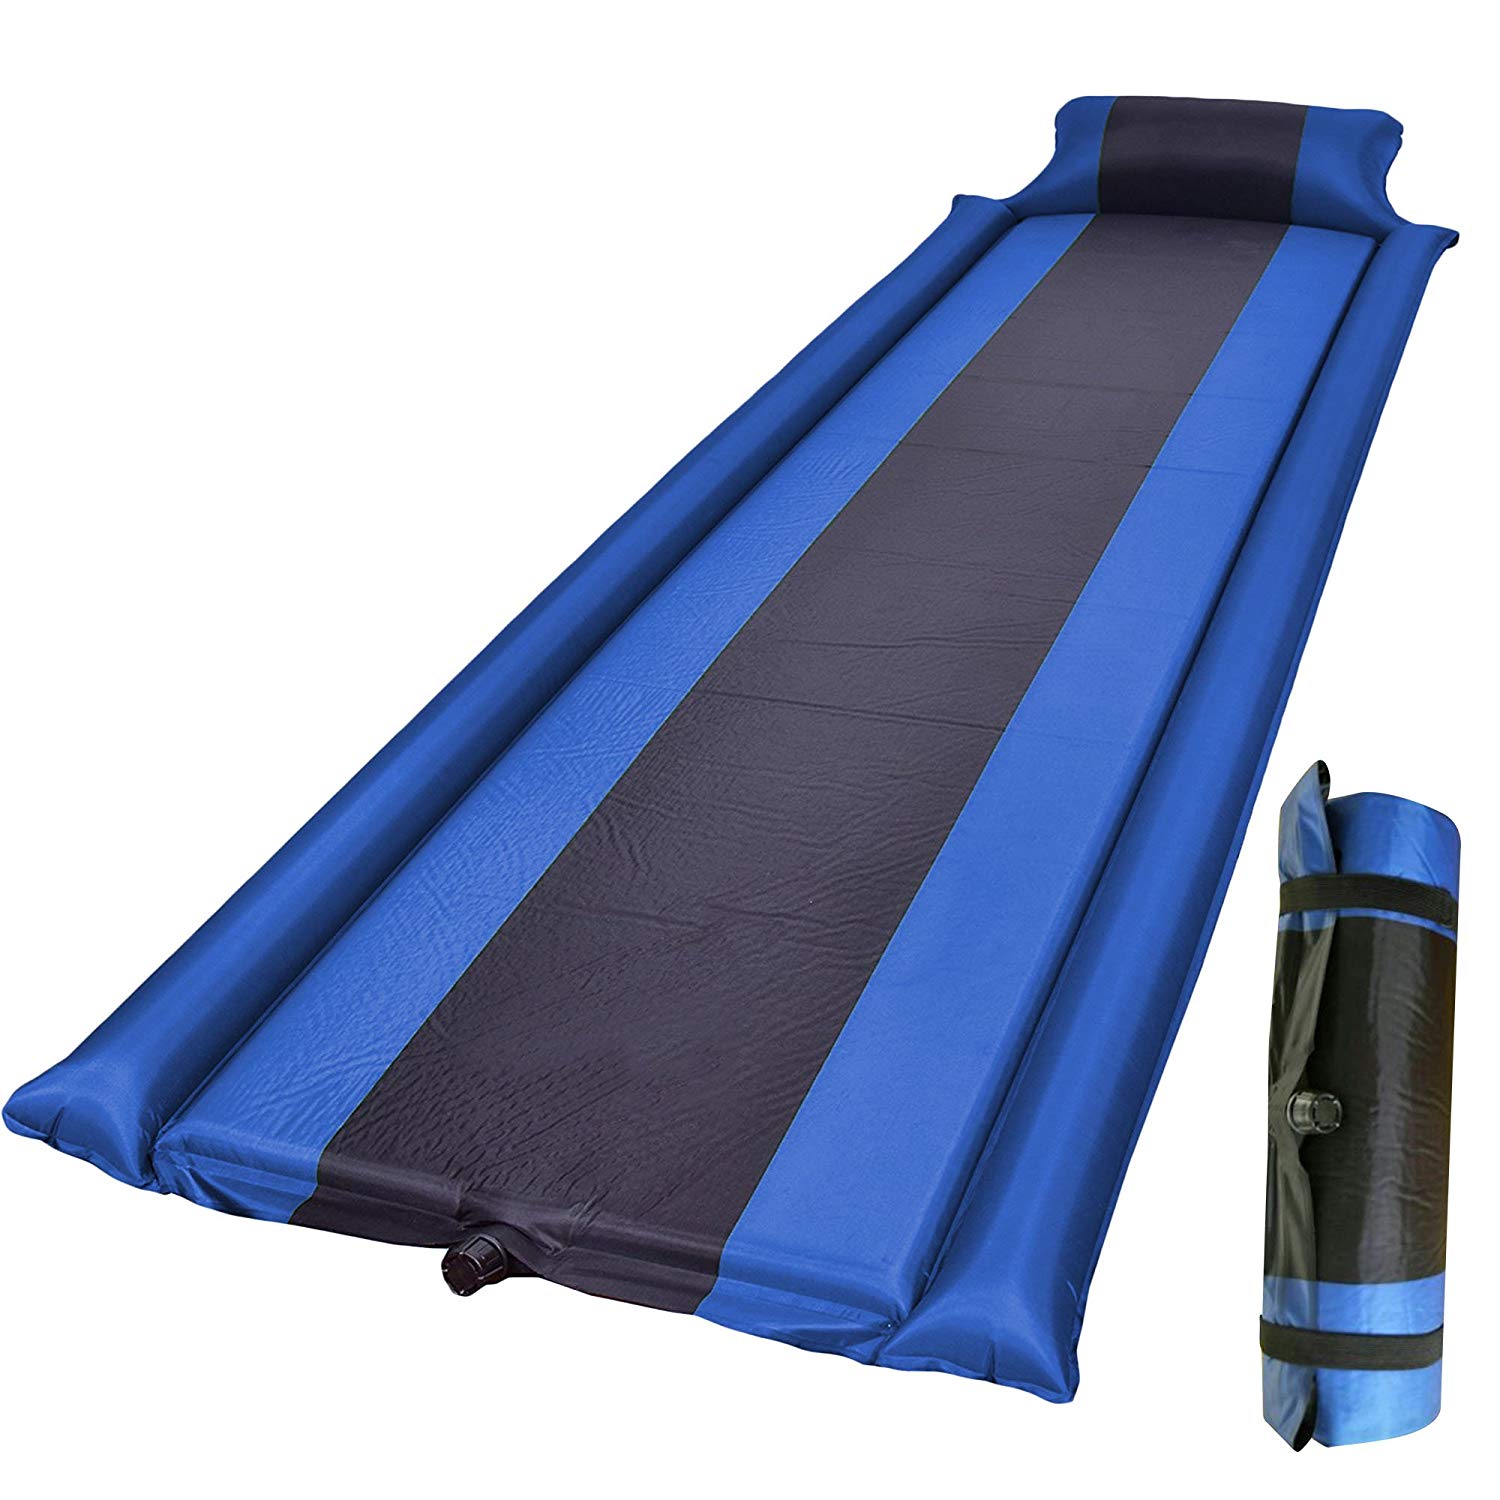 The best sleeping pad choosing way and it’s caring tips